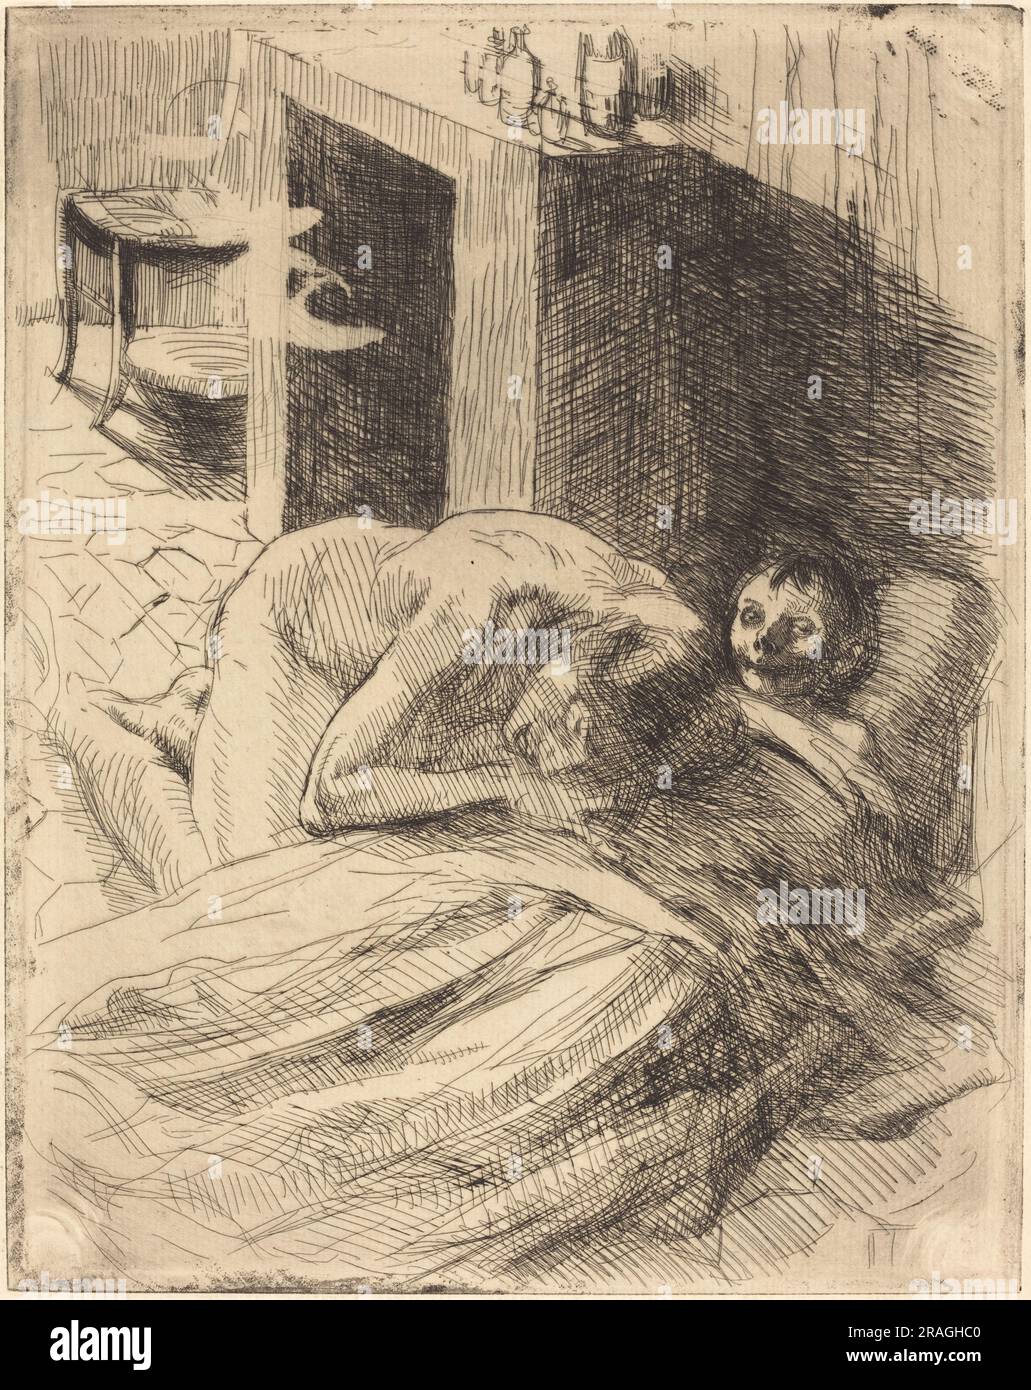 'Albert Besnard, Misery (La Misère), c. 1886, etching on laid paper, plate: 31.1 x 24.5 cm (12 1/4 x 9 5/8 in.) sheet: 44.2 x 31.6 cm (17 3/8 x 12 7/16 in.), Gift of Mr. and Mrs. Daniel Bell, 1996.136.3' Stock Photo